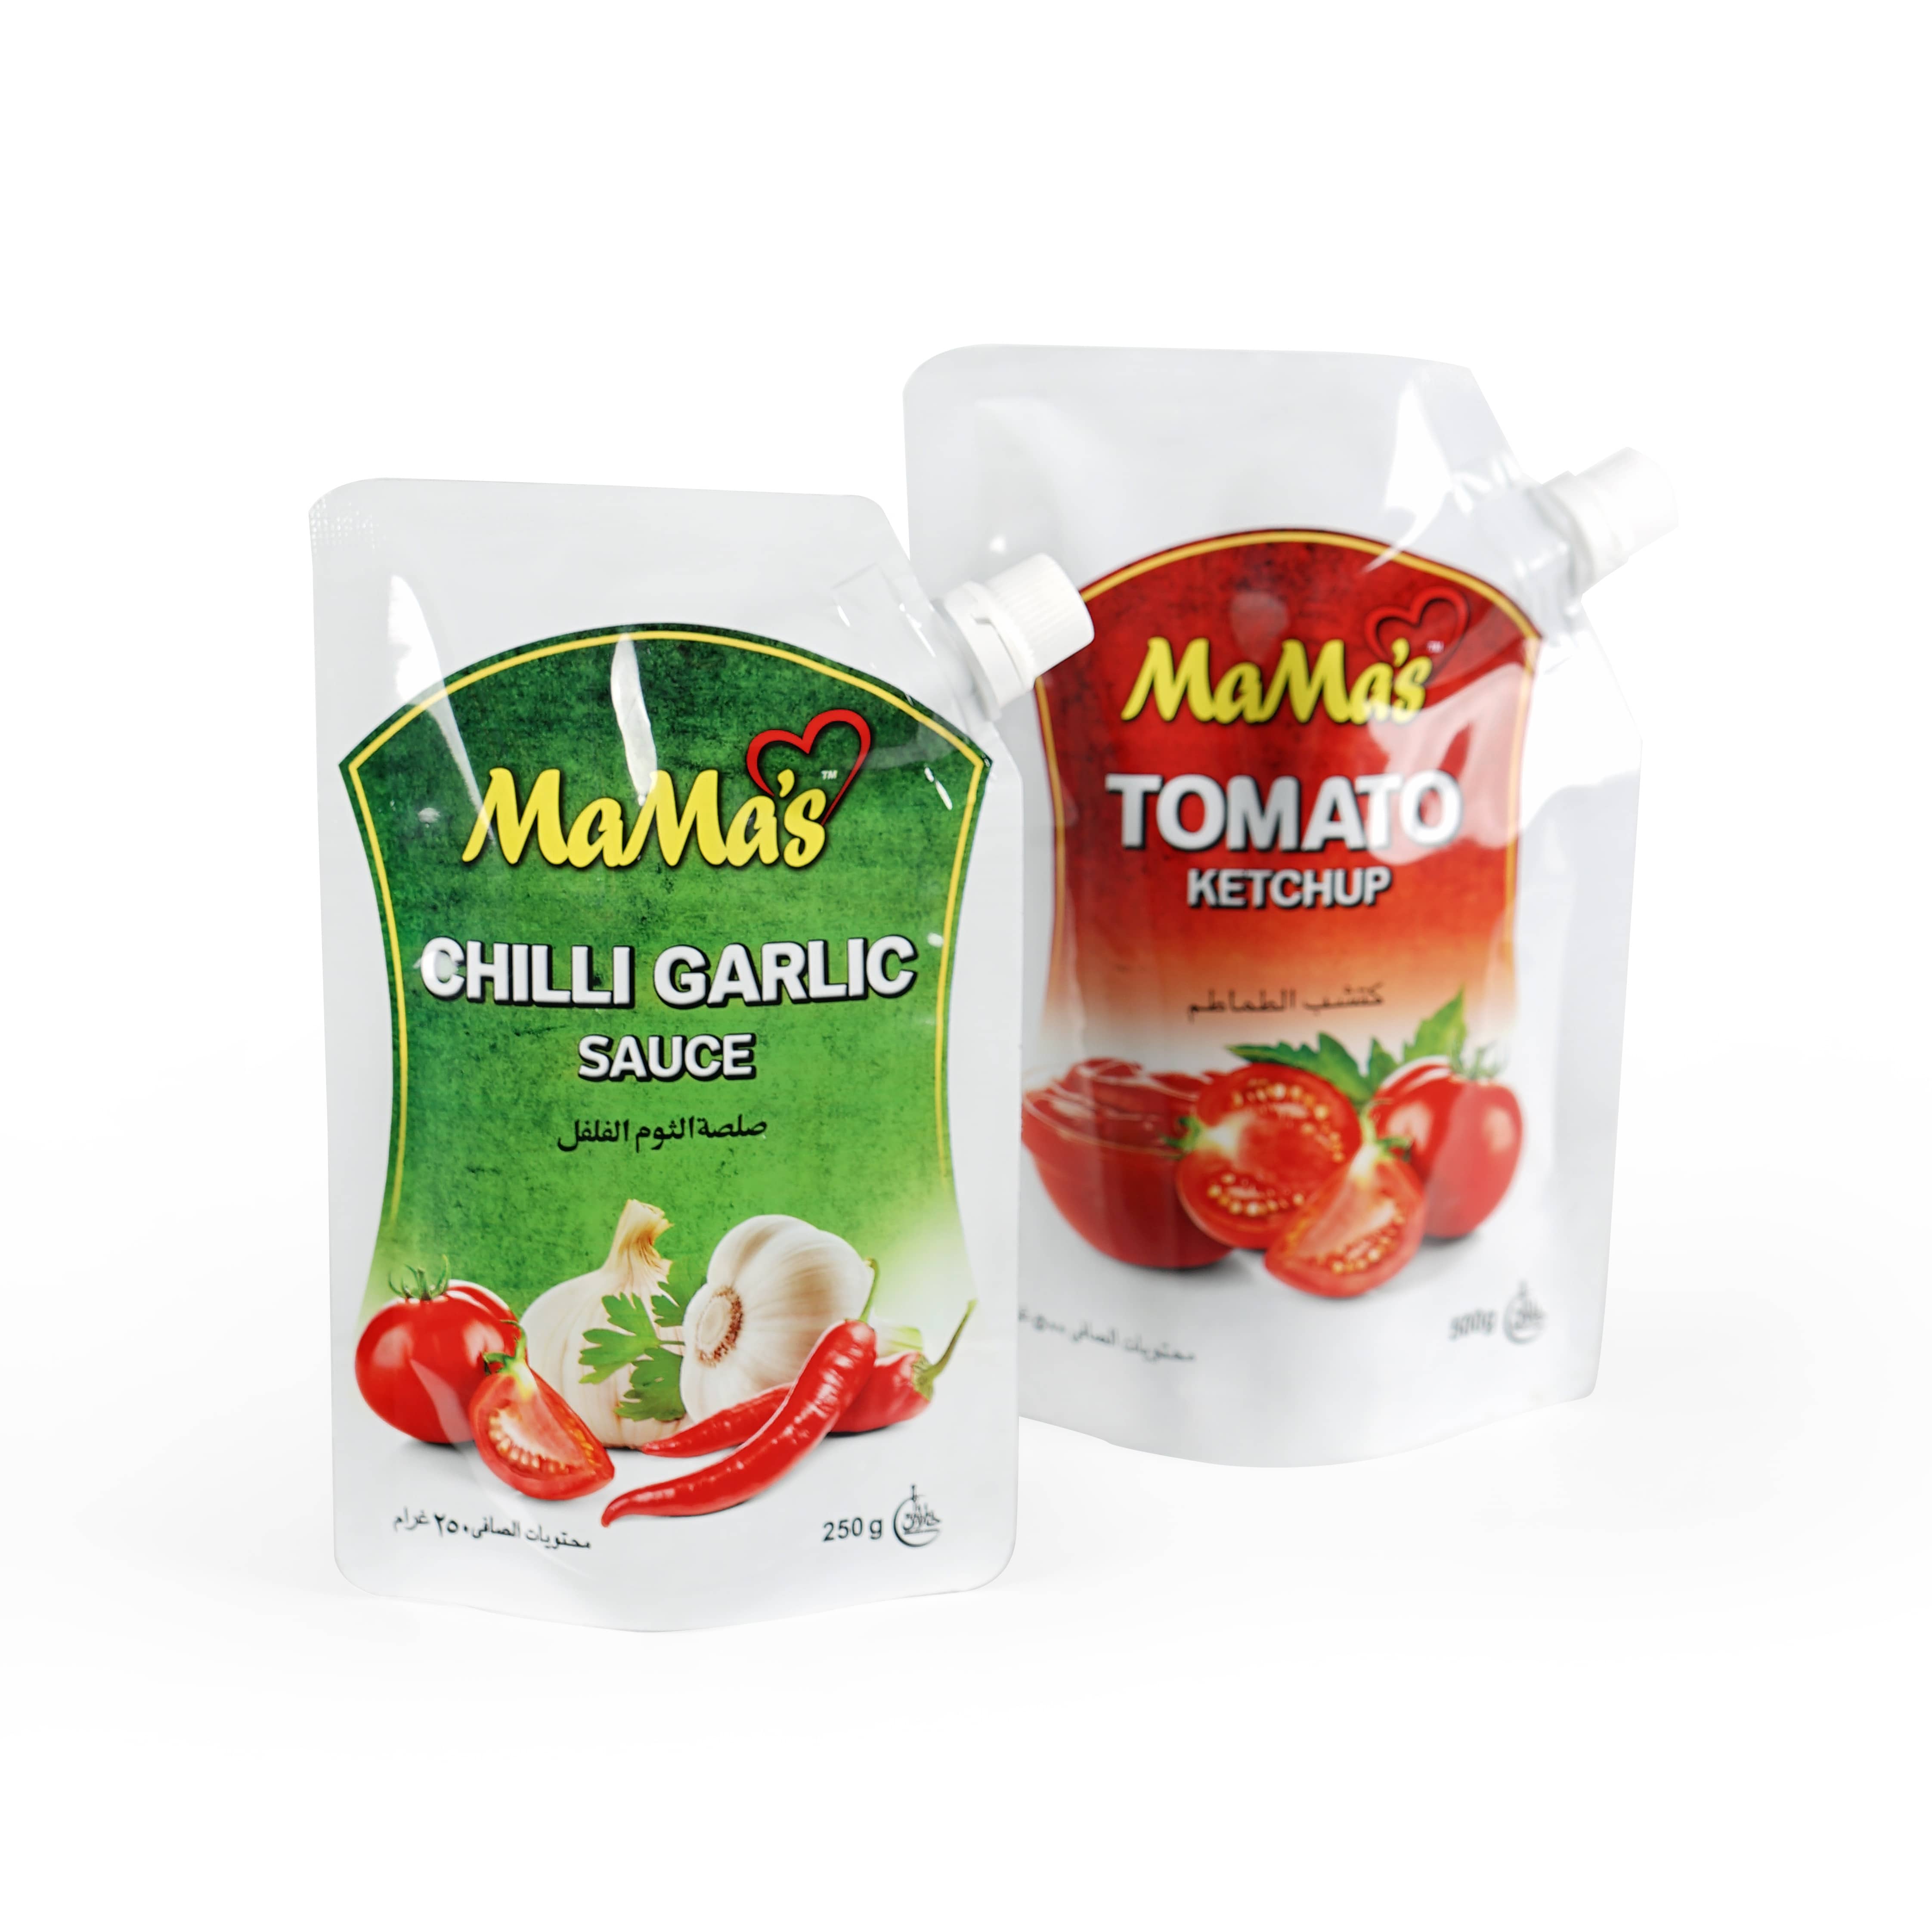 Plastic Food Grade 500g Hot Sauce Packaging Bags Knorr Sauce Packets